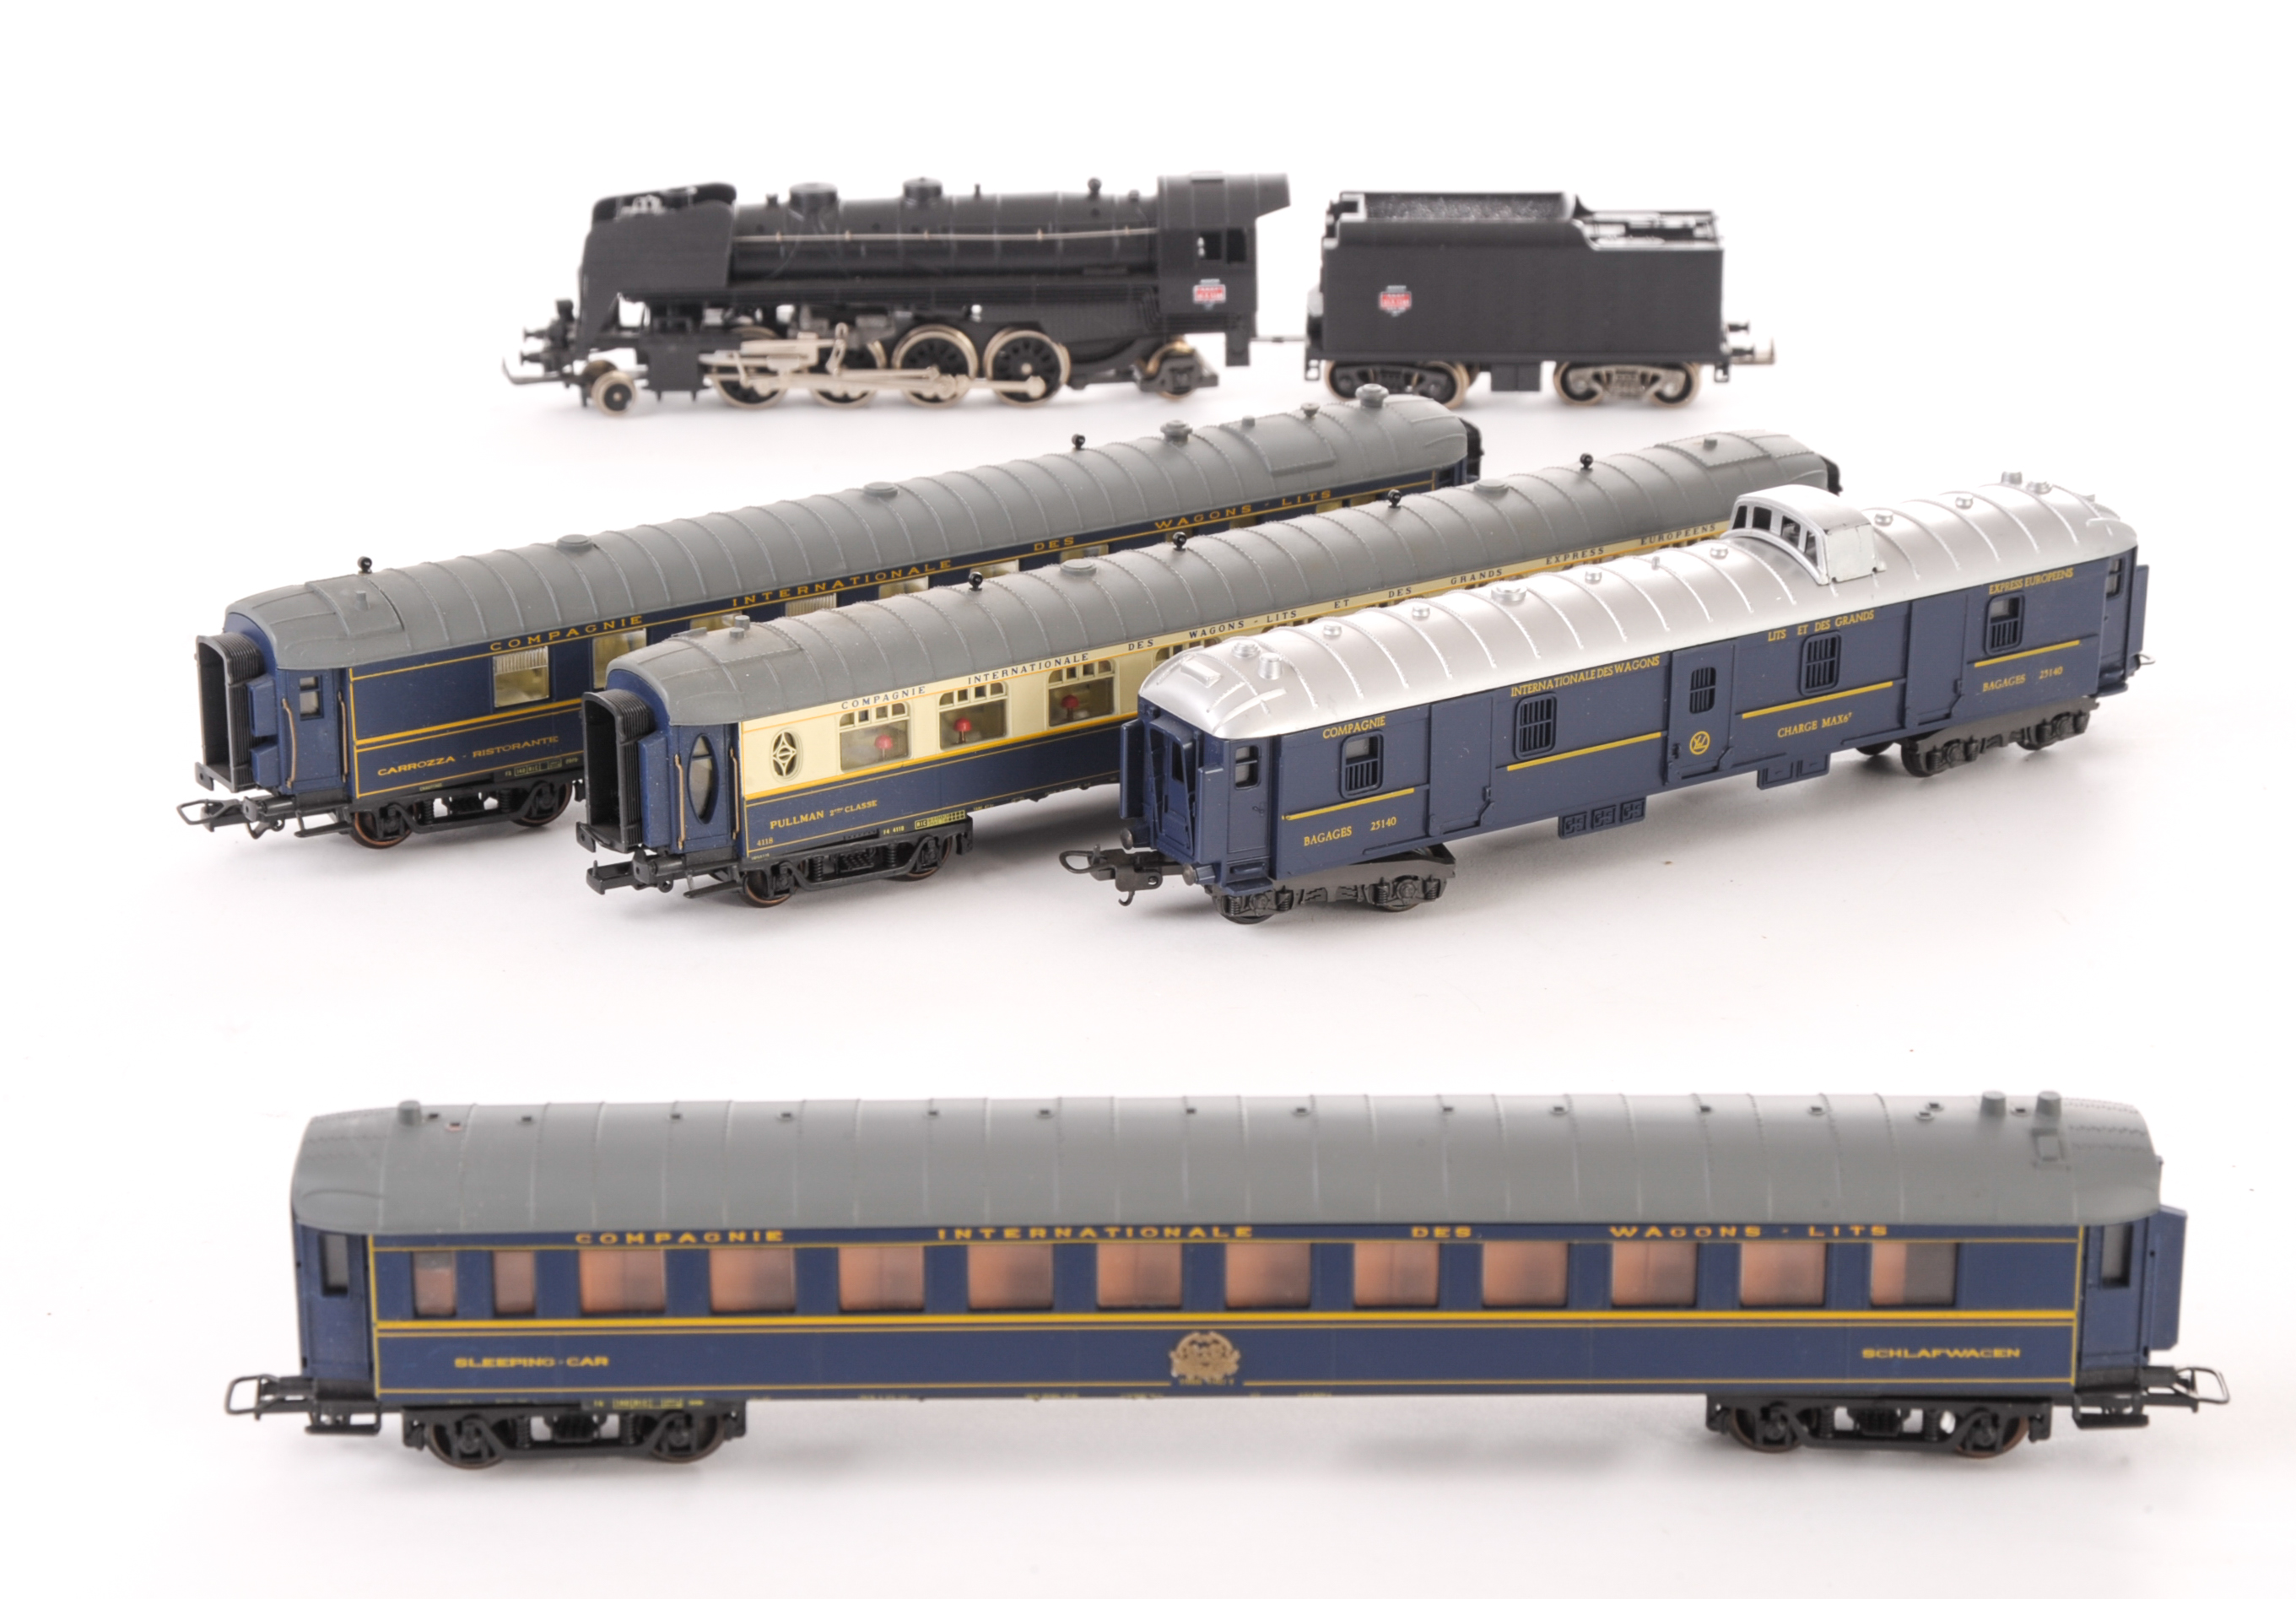 Lima and Jouef H0 Gauge Locomotive and Wagons-Lits stock: Lima 2-8-2 locomotive in black as SNCF